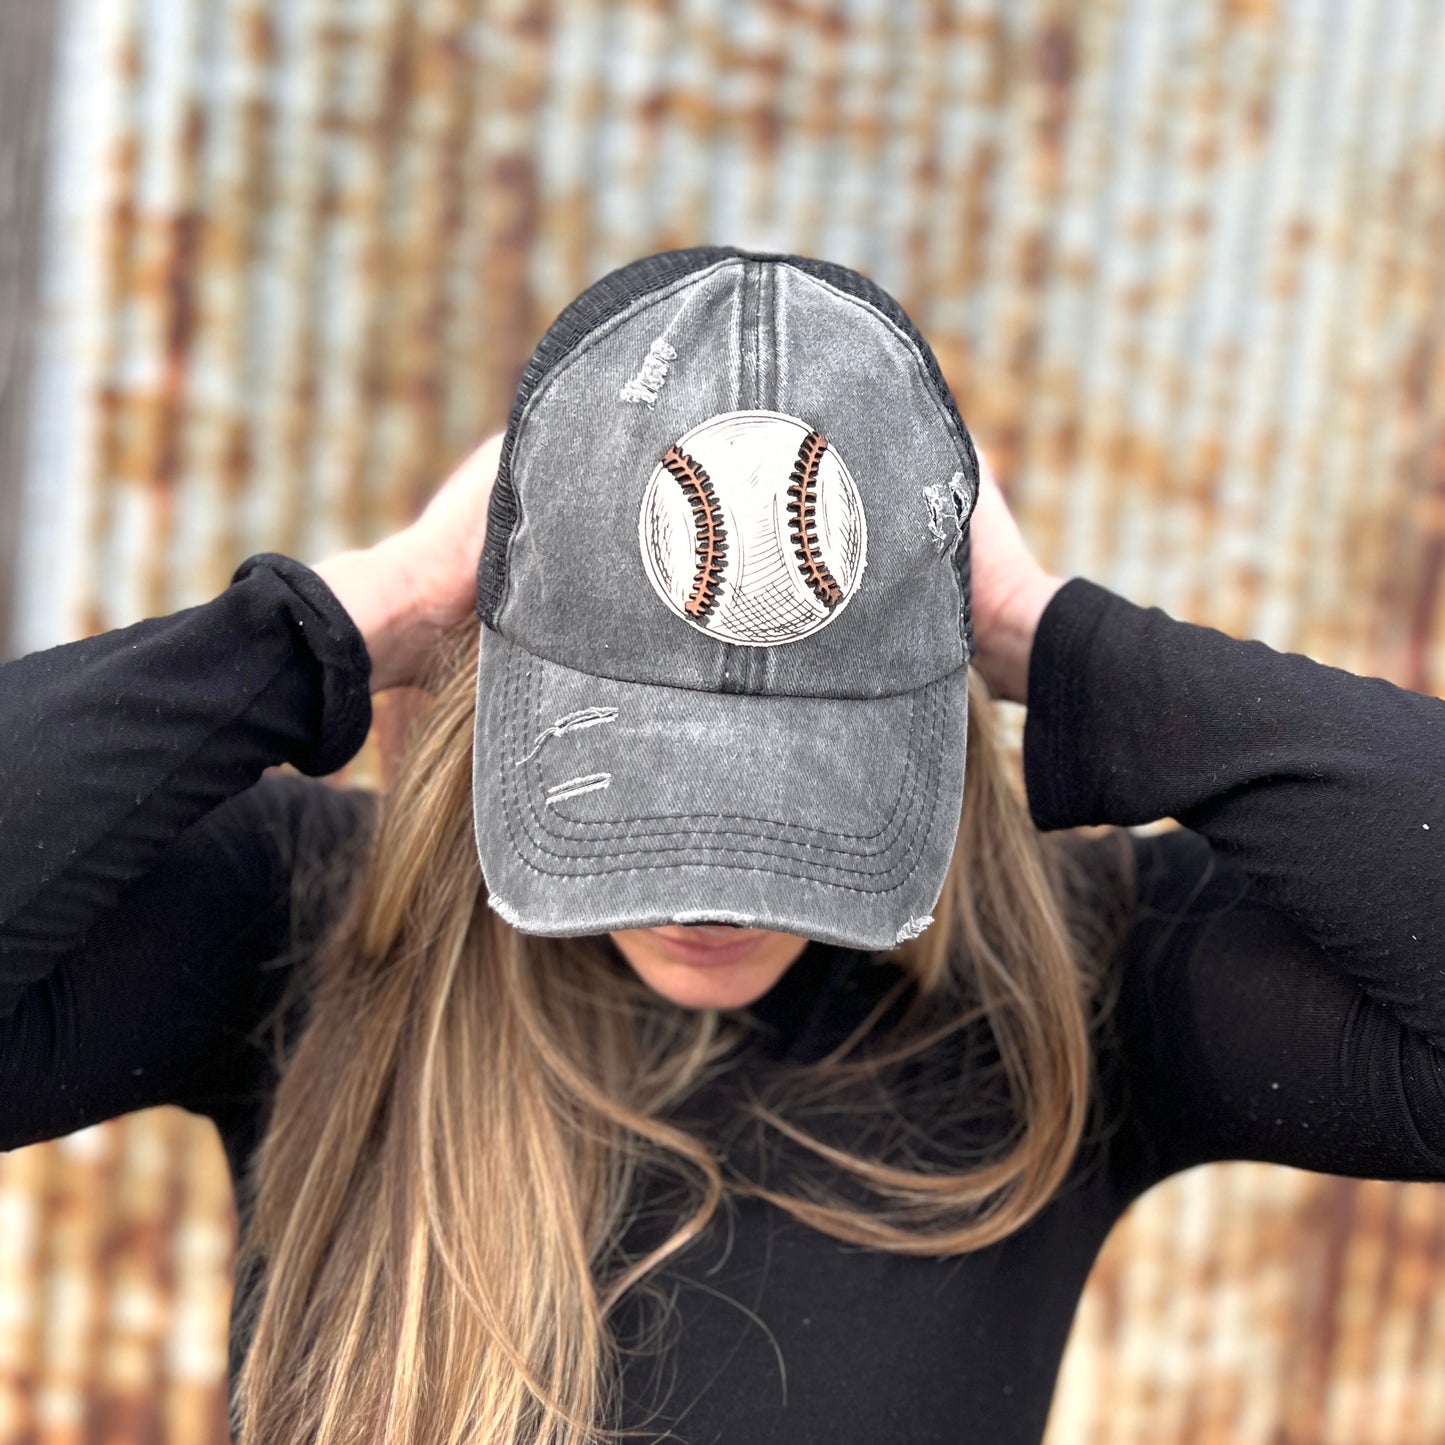 Distressed Black Baseball Cap with Material baseball with leather laces patch. Ponytail back